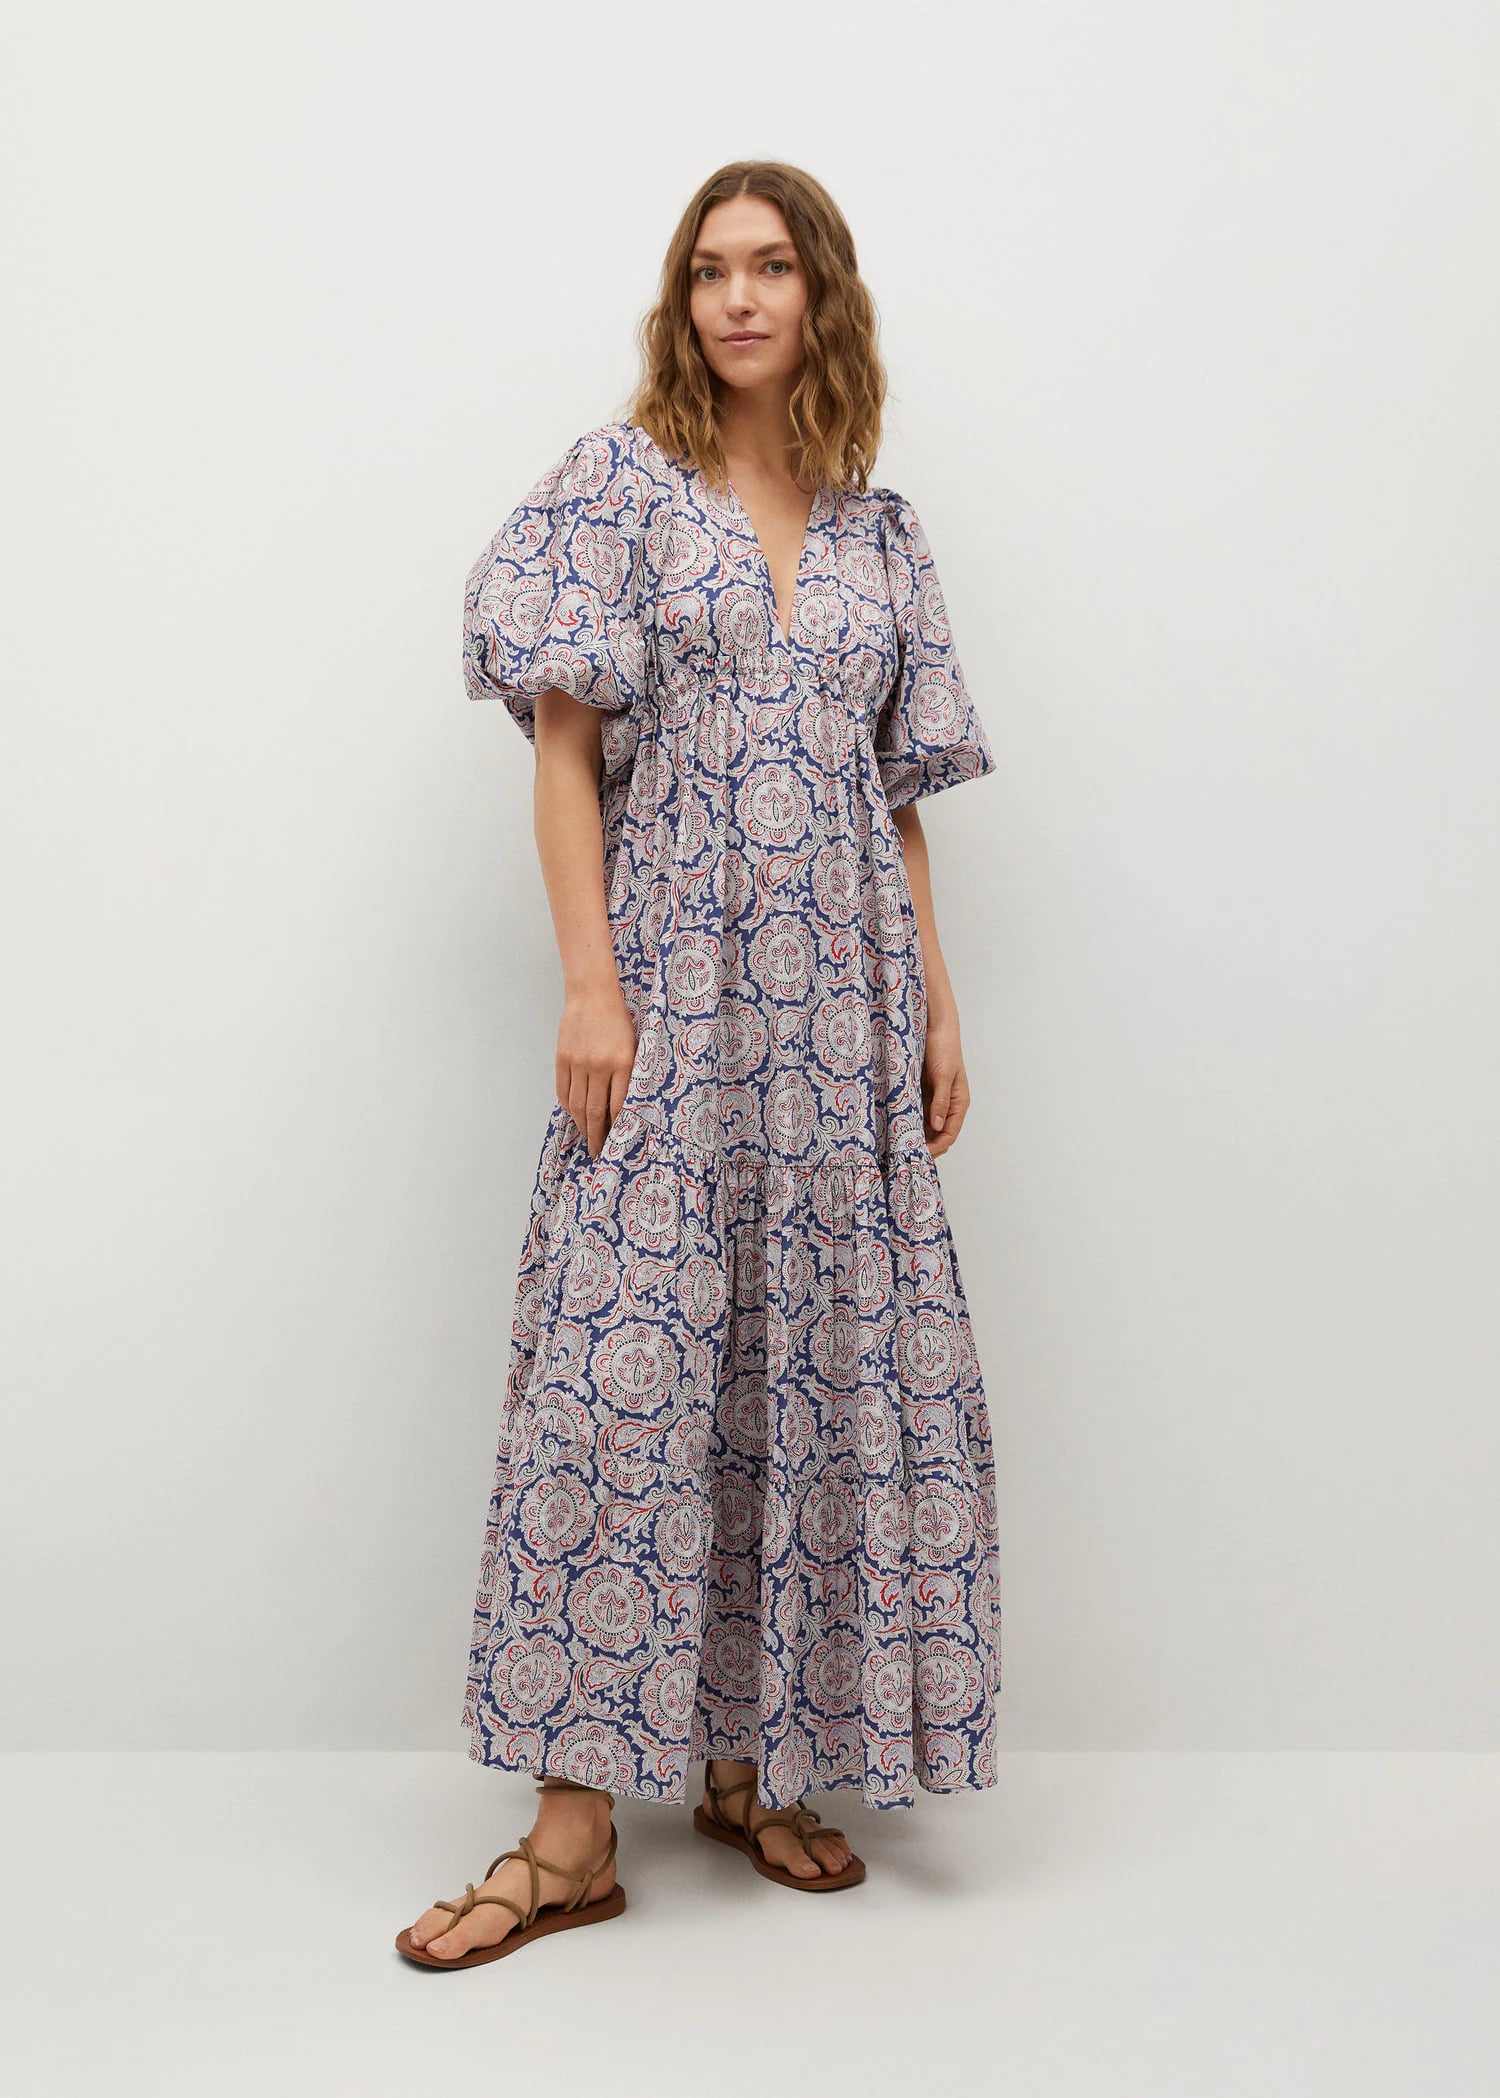 For an Eye-Catching Print: Mango Printed Maxi Dress These Fall Dresses Our Style Language — We Want Them All! | POPSUGAR Fashion Photo 25